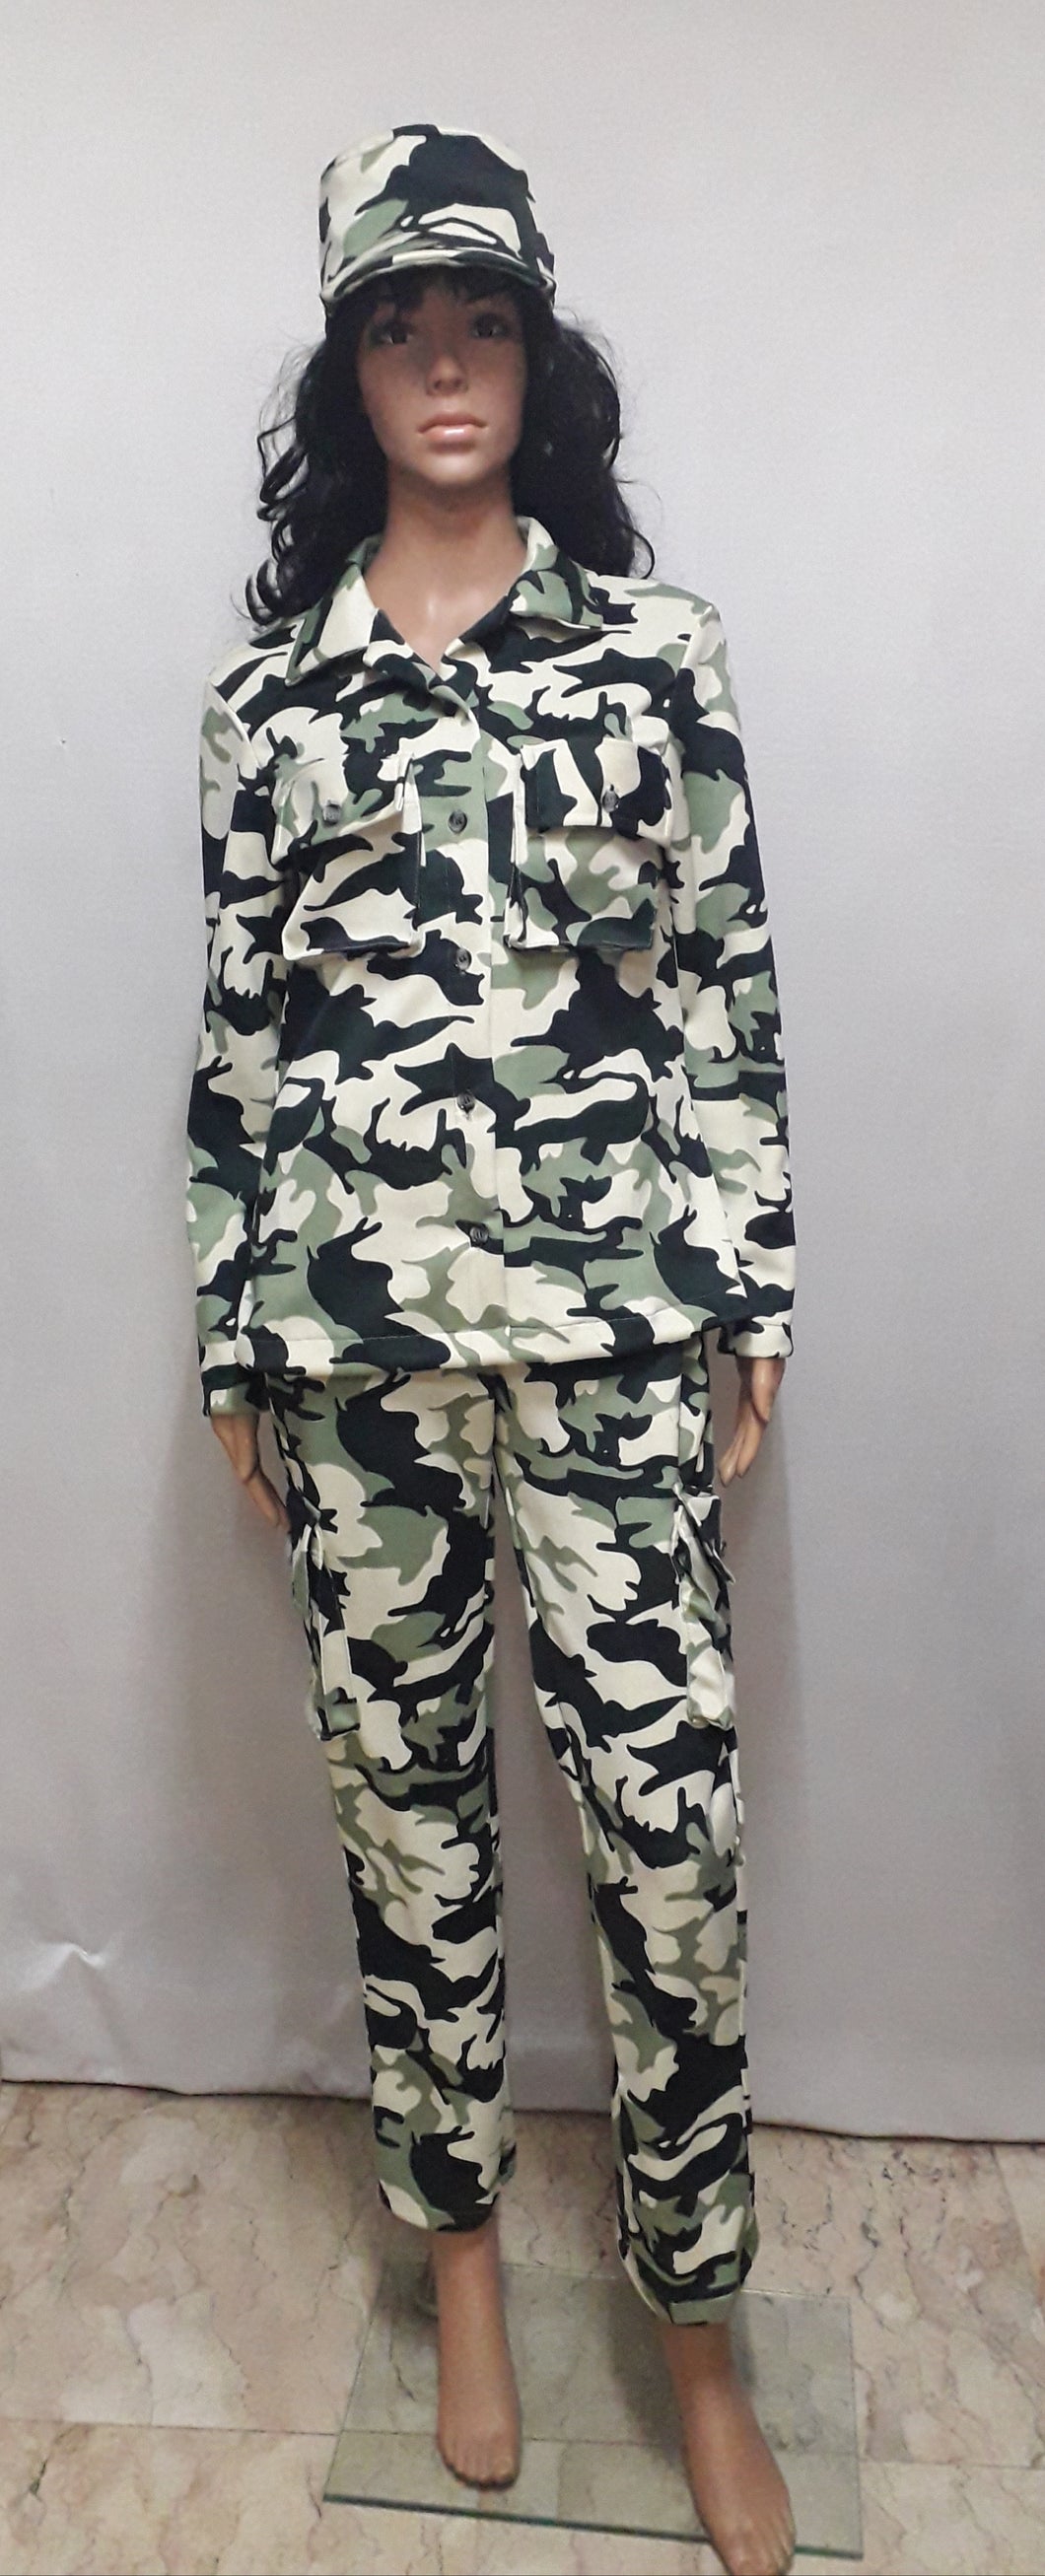 Army Camouflage Costume 4